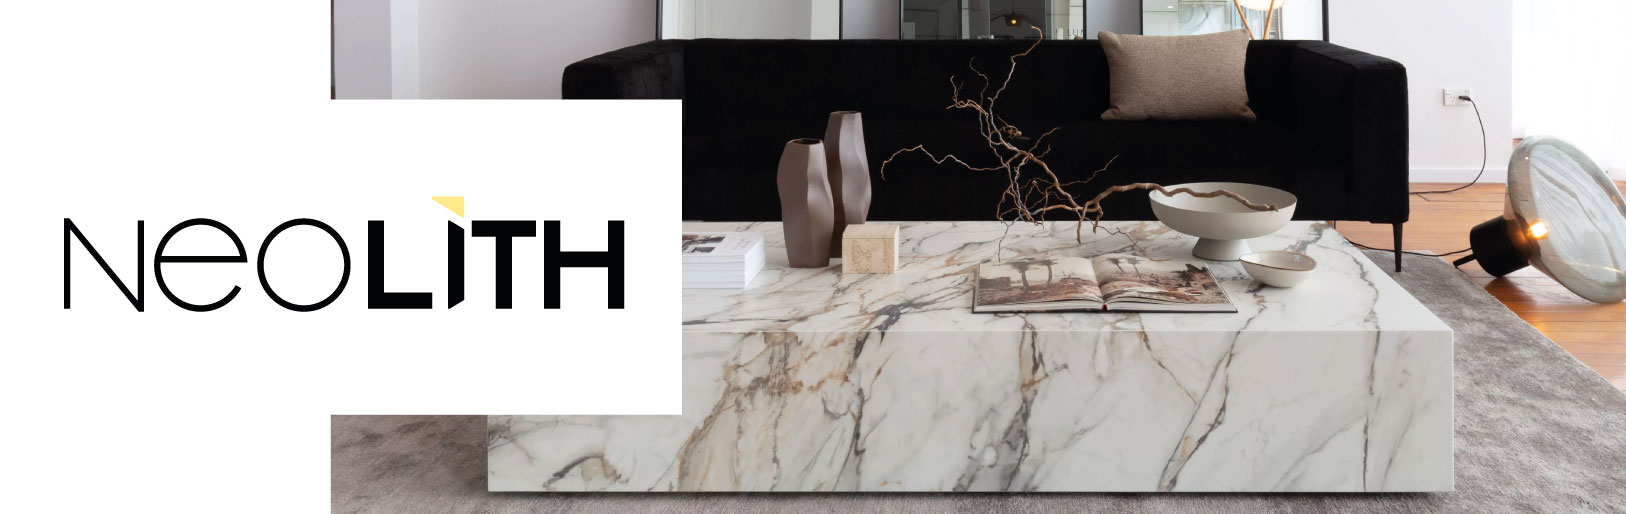 Neolith: Discovering the Technologies Behind the Innovative Surface